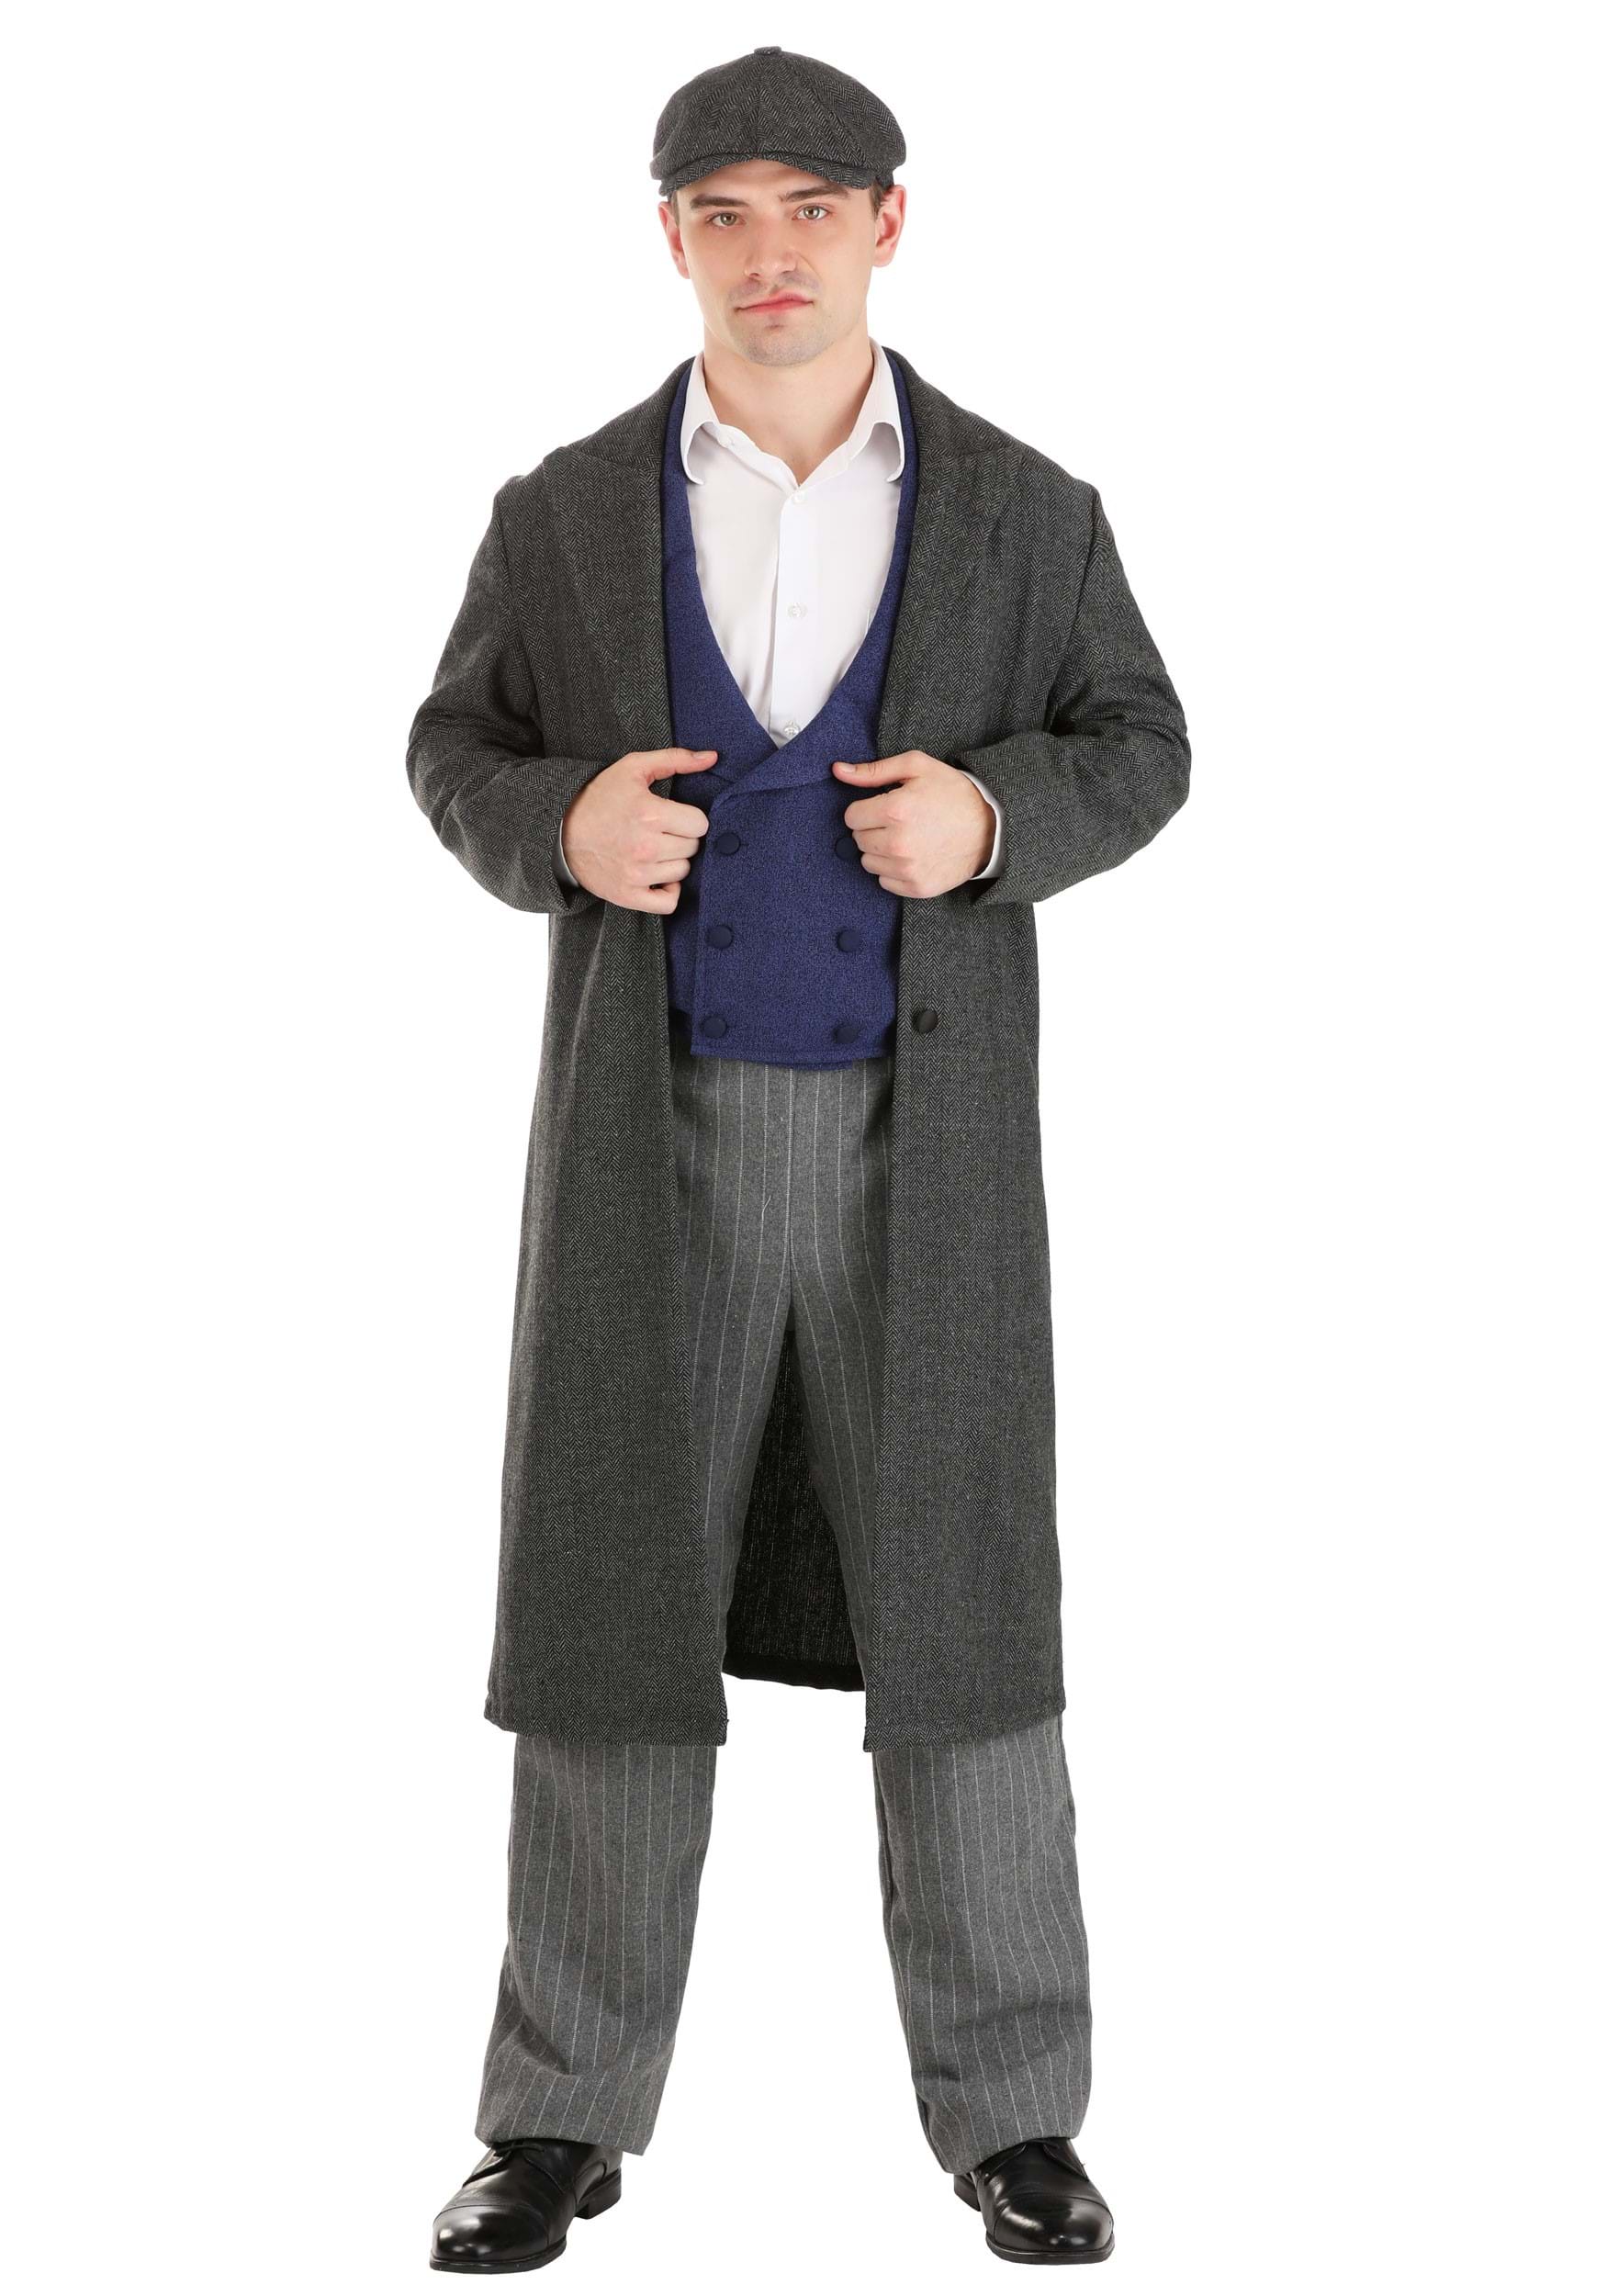 Image of Adult Deluxe Gangster Costume | Roaring '20s / Gangster Costumes ID FUN5793AD-S